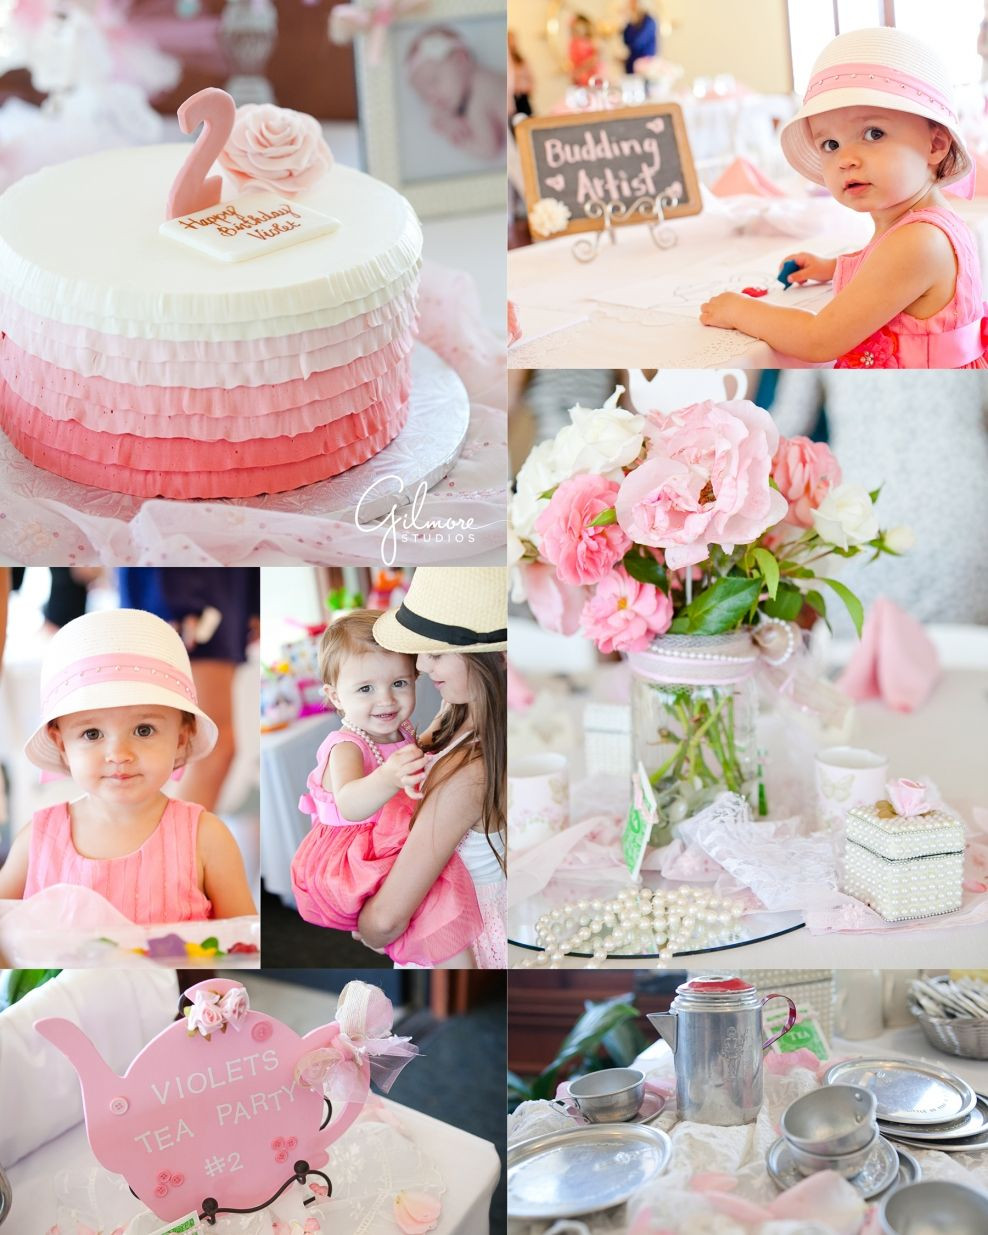 Tea Party Themed Birthday Party Ideas
 2nd Birthday Tea Party in Newport Beach Girl Birthday party Tea Party theme Decorations Cute